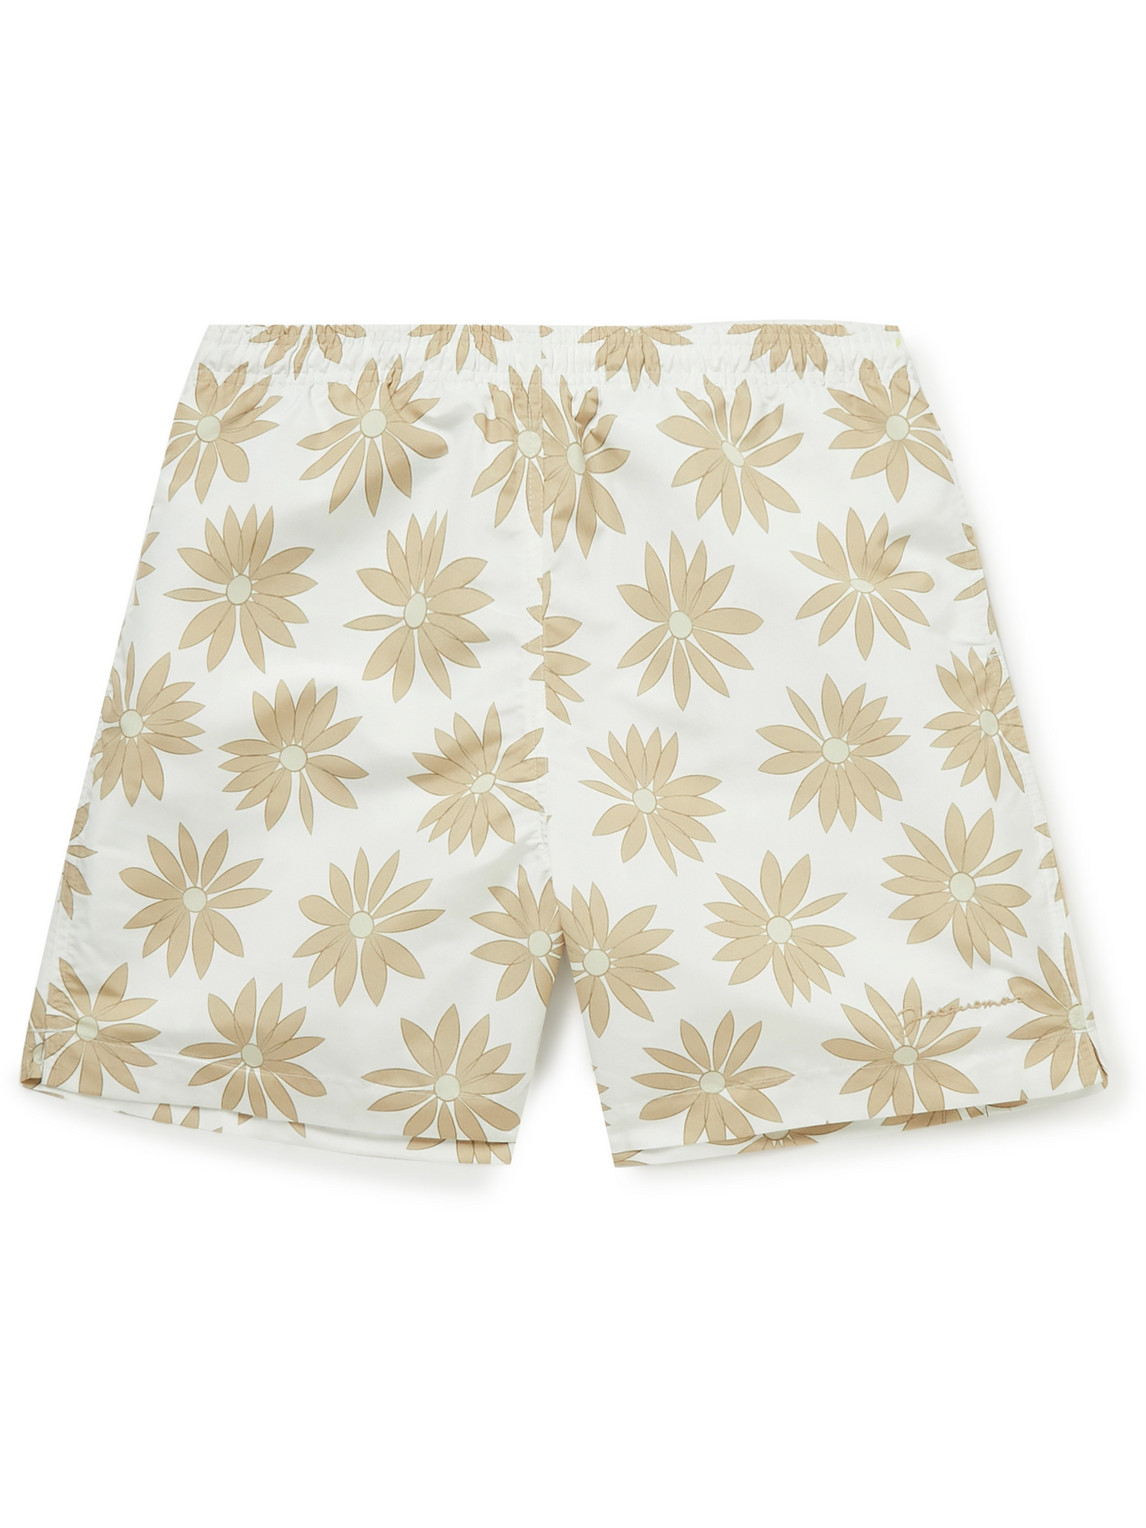 Mid-Length Floral-Print Recycled Swim Shorts